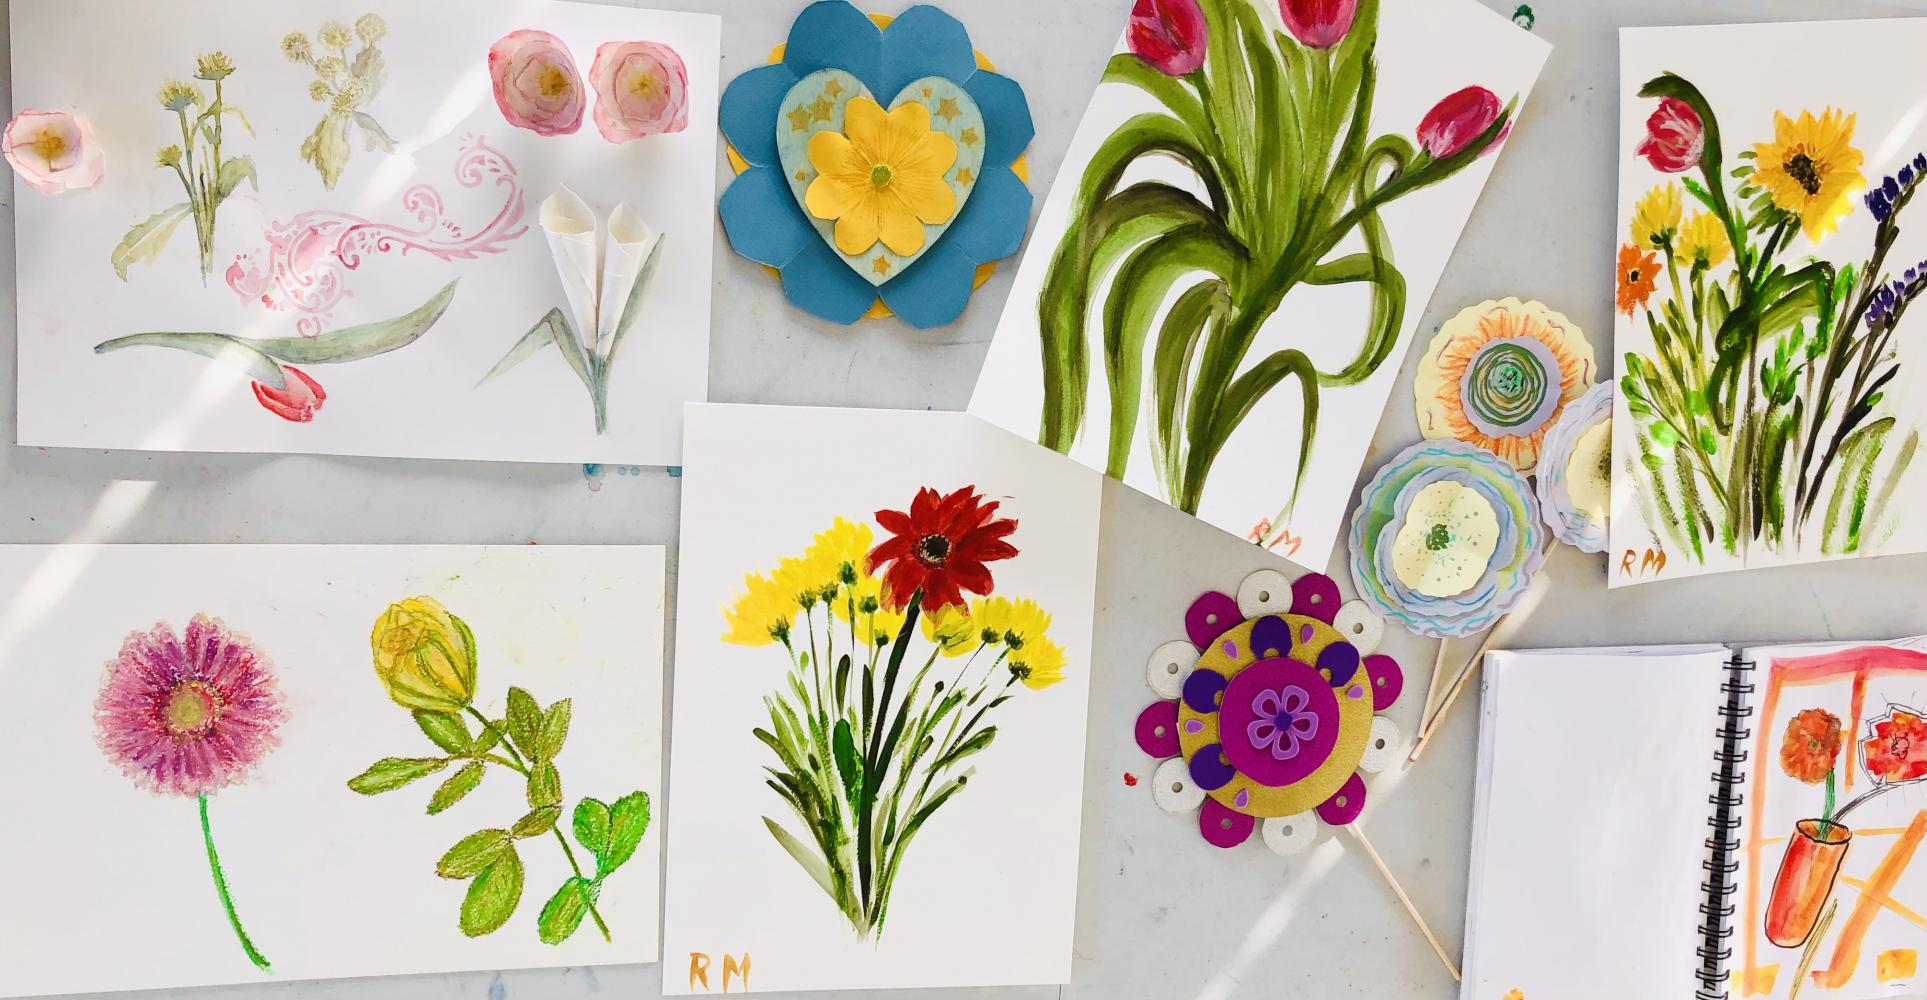 A selection of artworks depicting colourful flowers, made using watercolours and pastels.